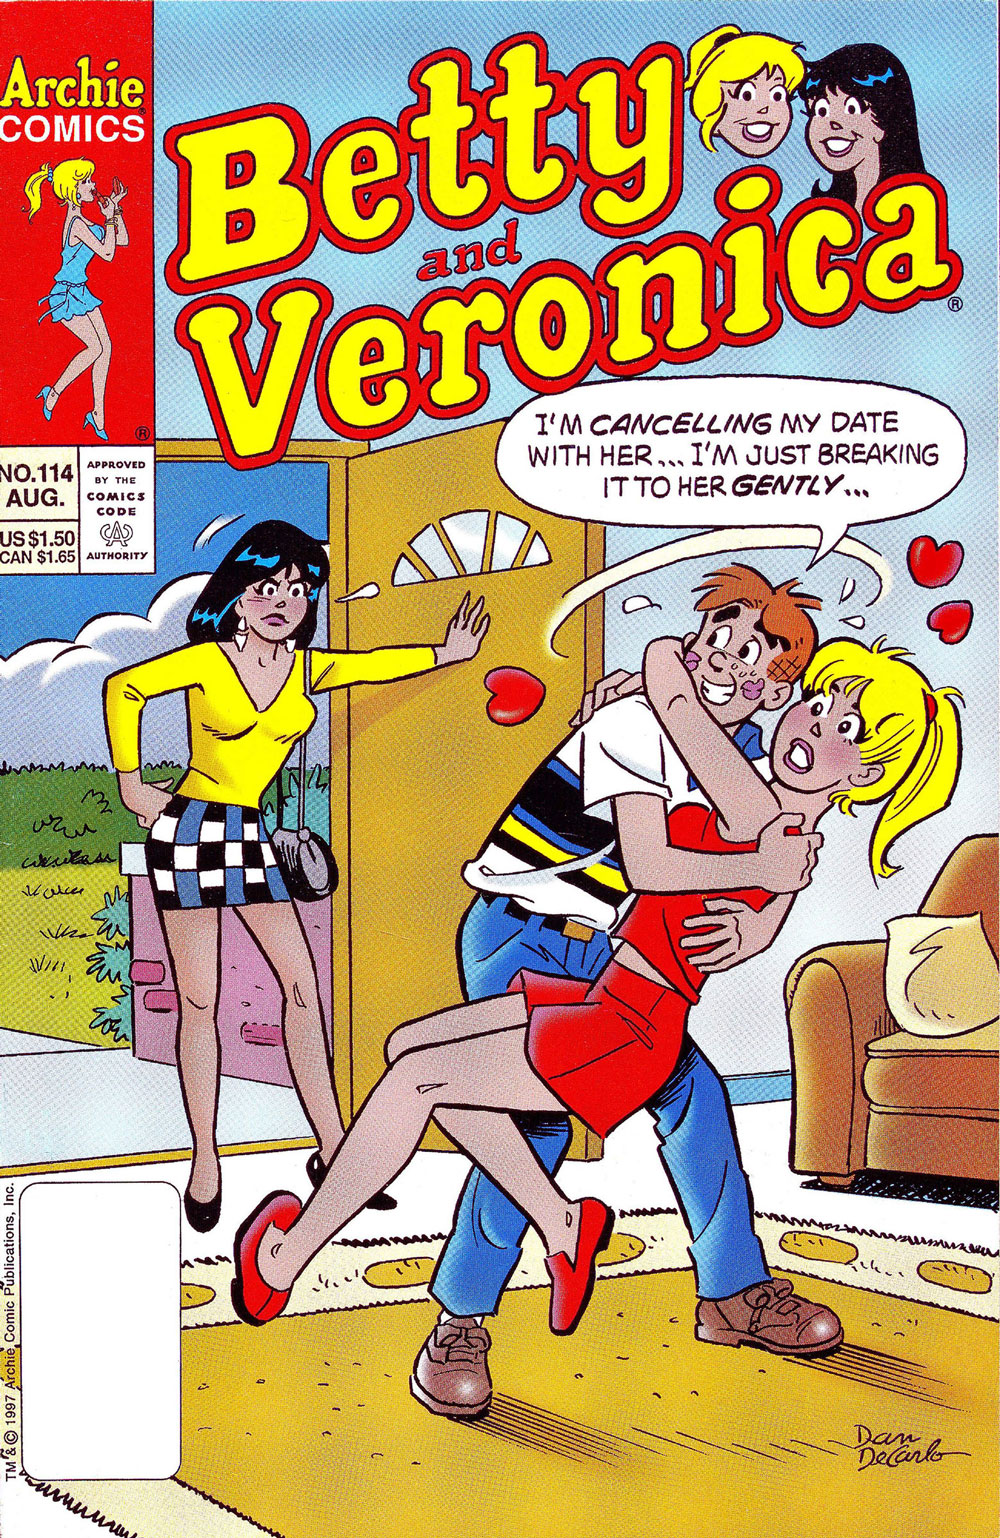 Cover of BETTY AND VERONICA #114. Betty and Archie are kissing while Veronica looks on in anger -- he says he was trying to break a date with Betty gently.